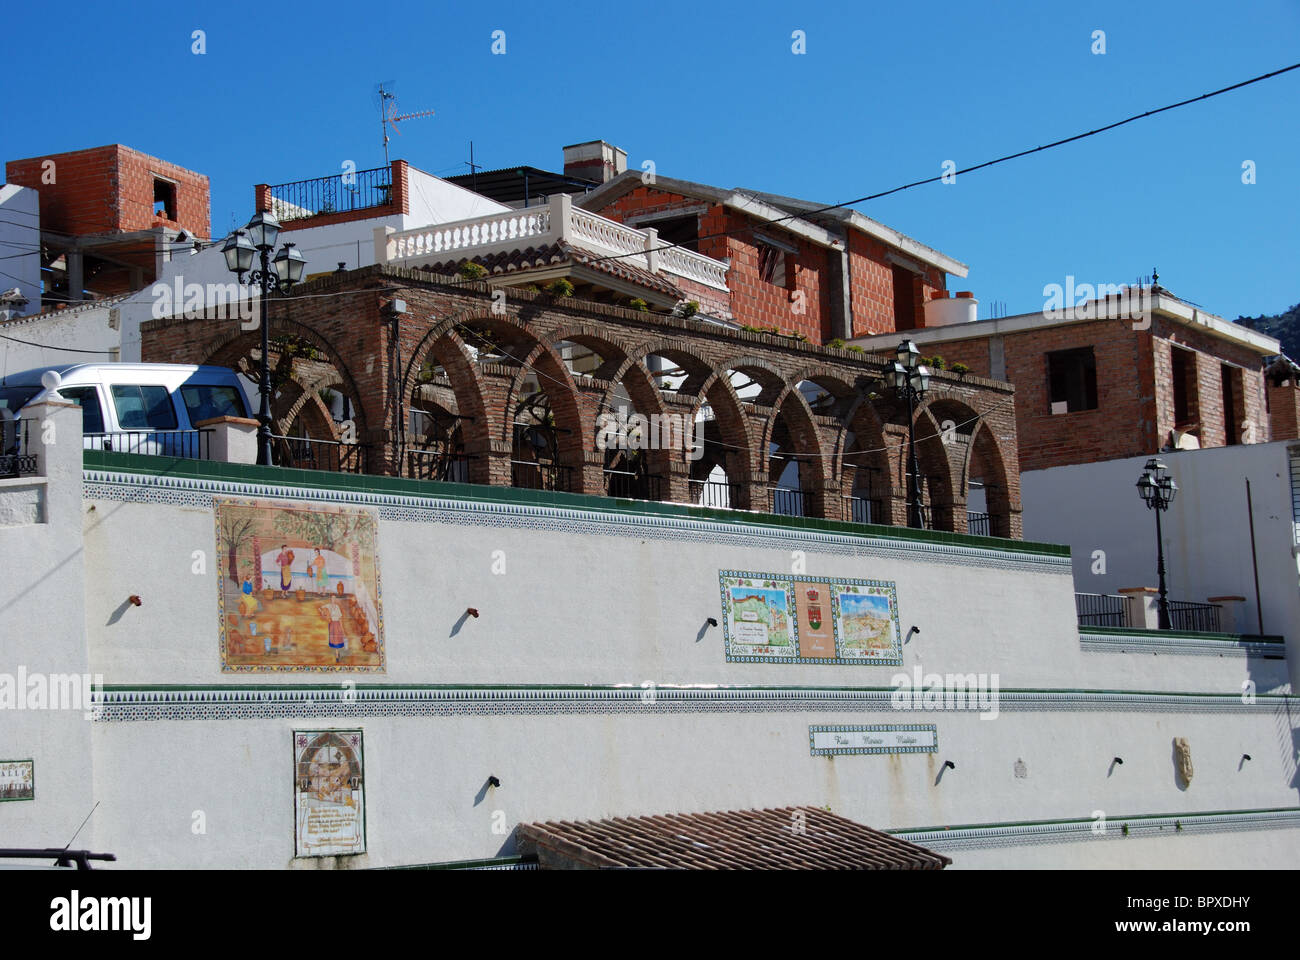 Arched public viewing area, Arenas, Costa del Sol, Malaga Province, Andalucia, Spain, Western Europe. Stock Photo